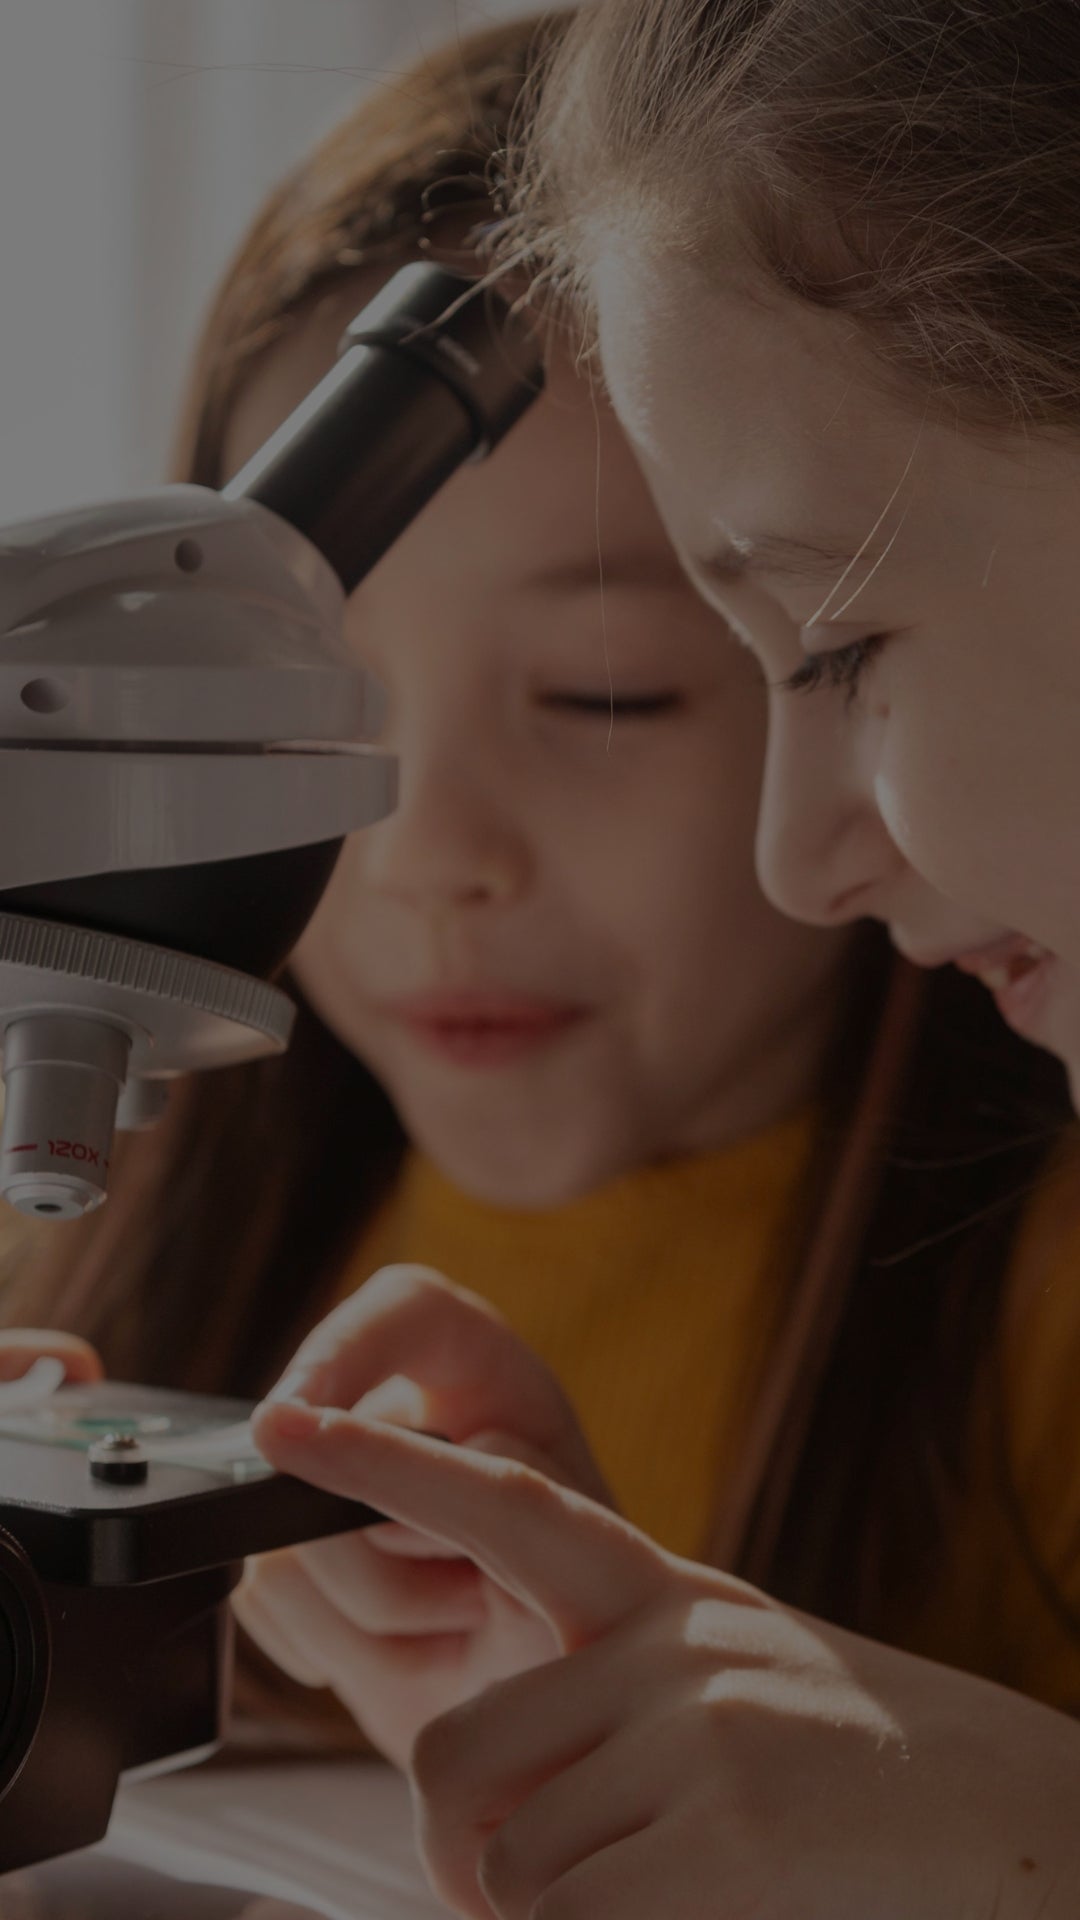 Two girls engrossed in scientific discovery as they observe a microscope slide together.